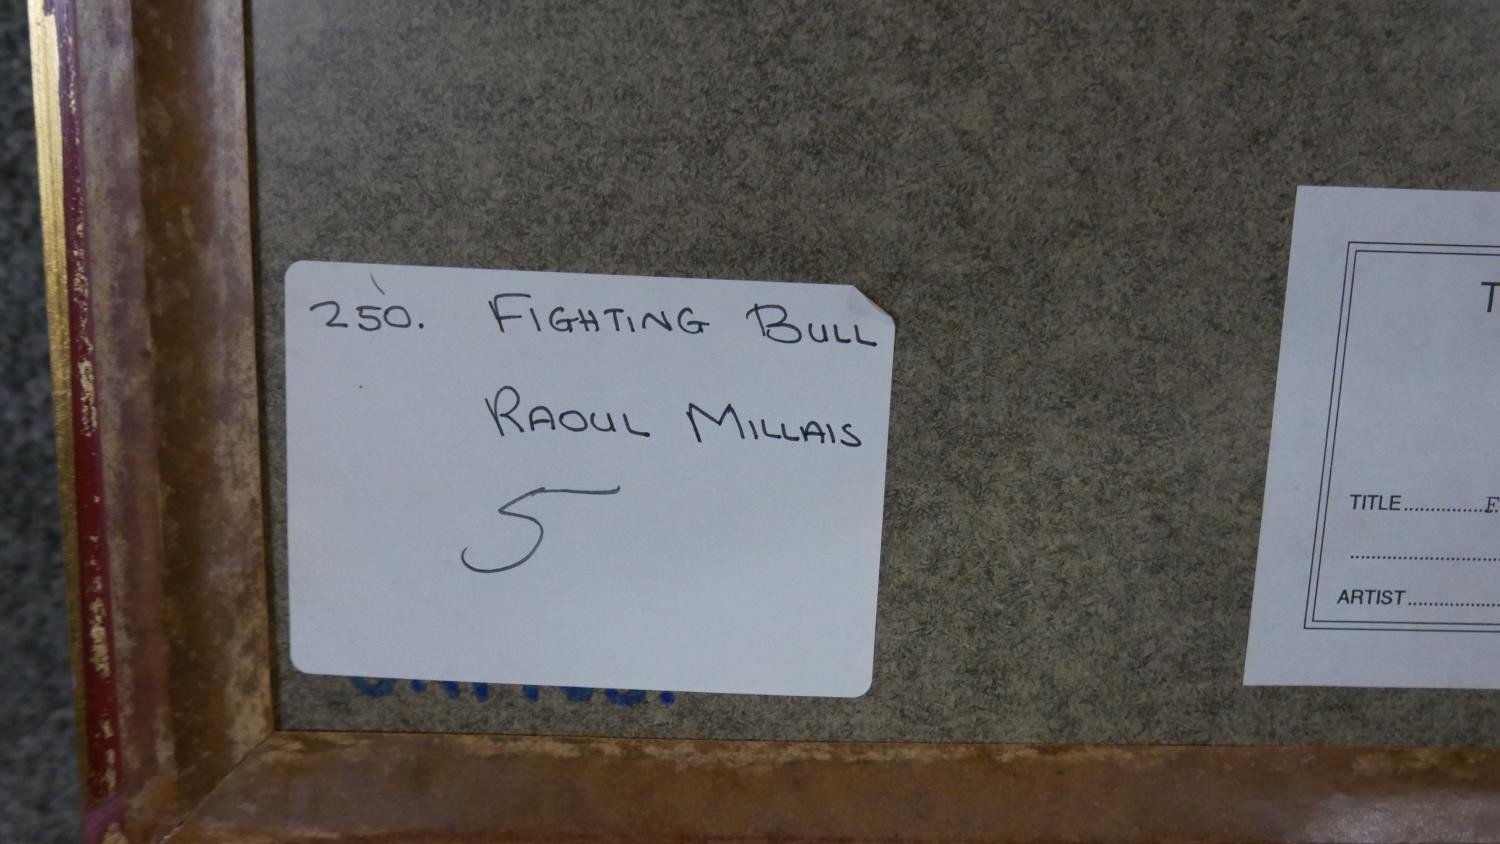 Raoul Millais, British (1901 - 1999), pastel on paper, 'Fighting Bull', signed, name plaque and - Image 10 of 10